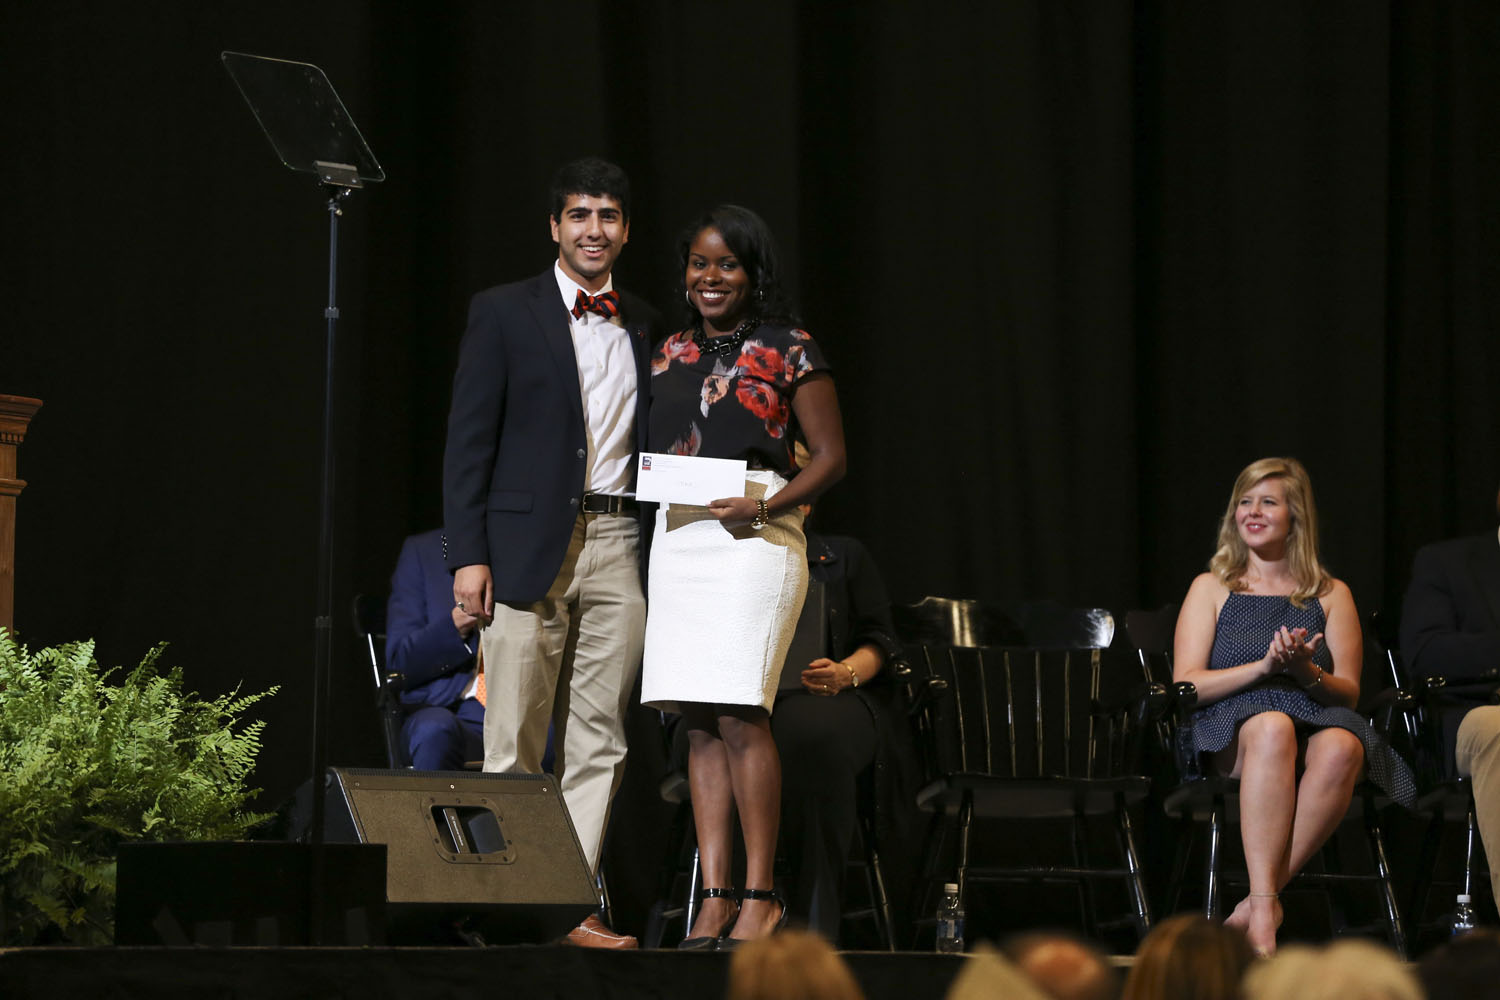 Tamara Saint-Surin, right, stands with D. Naveed Tavakol on stage for a picture